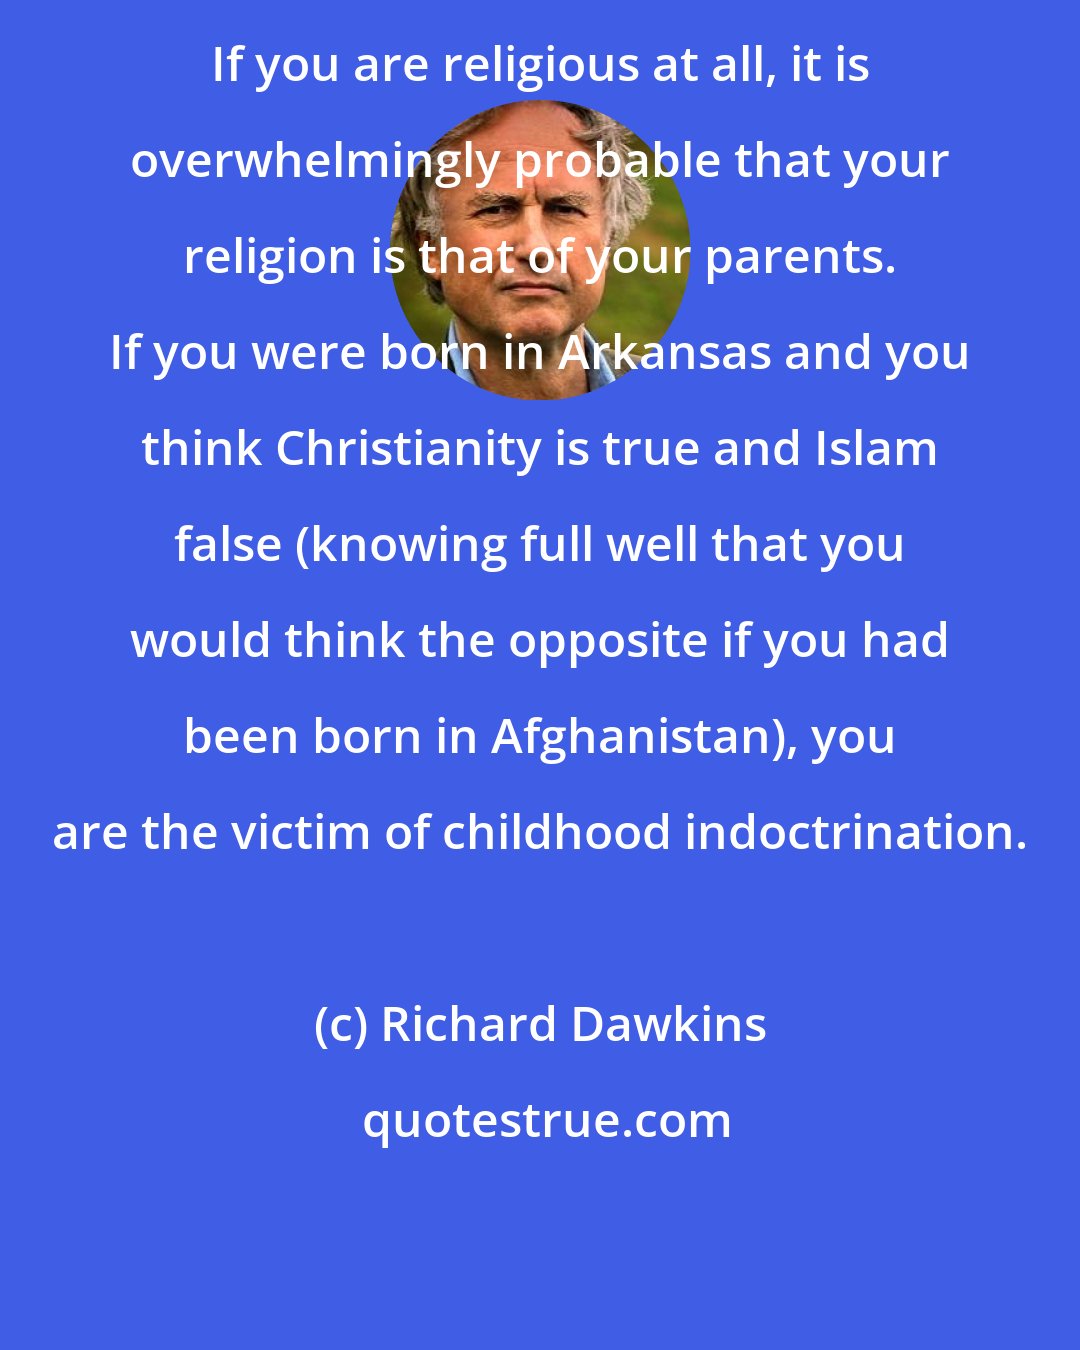 Richard Dawkins: If you are religious at all, it is overwhelmingly probable that your religion is that of your parents. If you were born in Arkansas and you think Christianity is true and Islam false (knowing full well that you would think the opposite if you had been born in Afghanistan), you are the victim of childhood indoctrination.